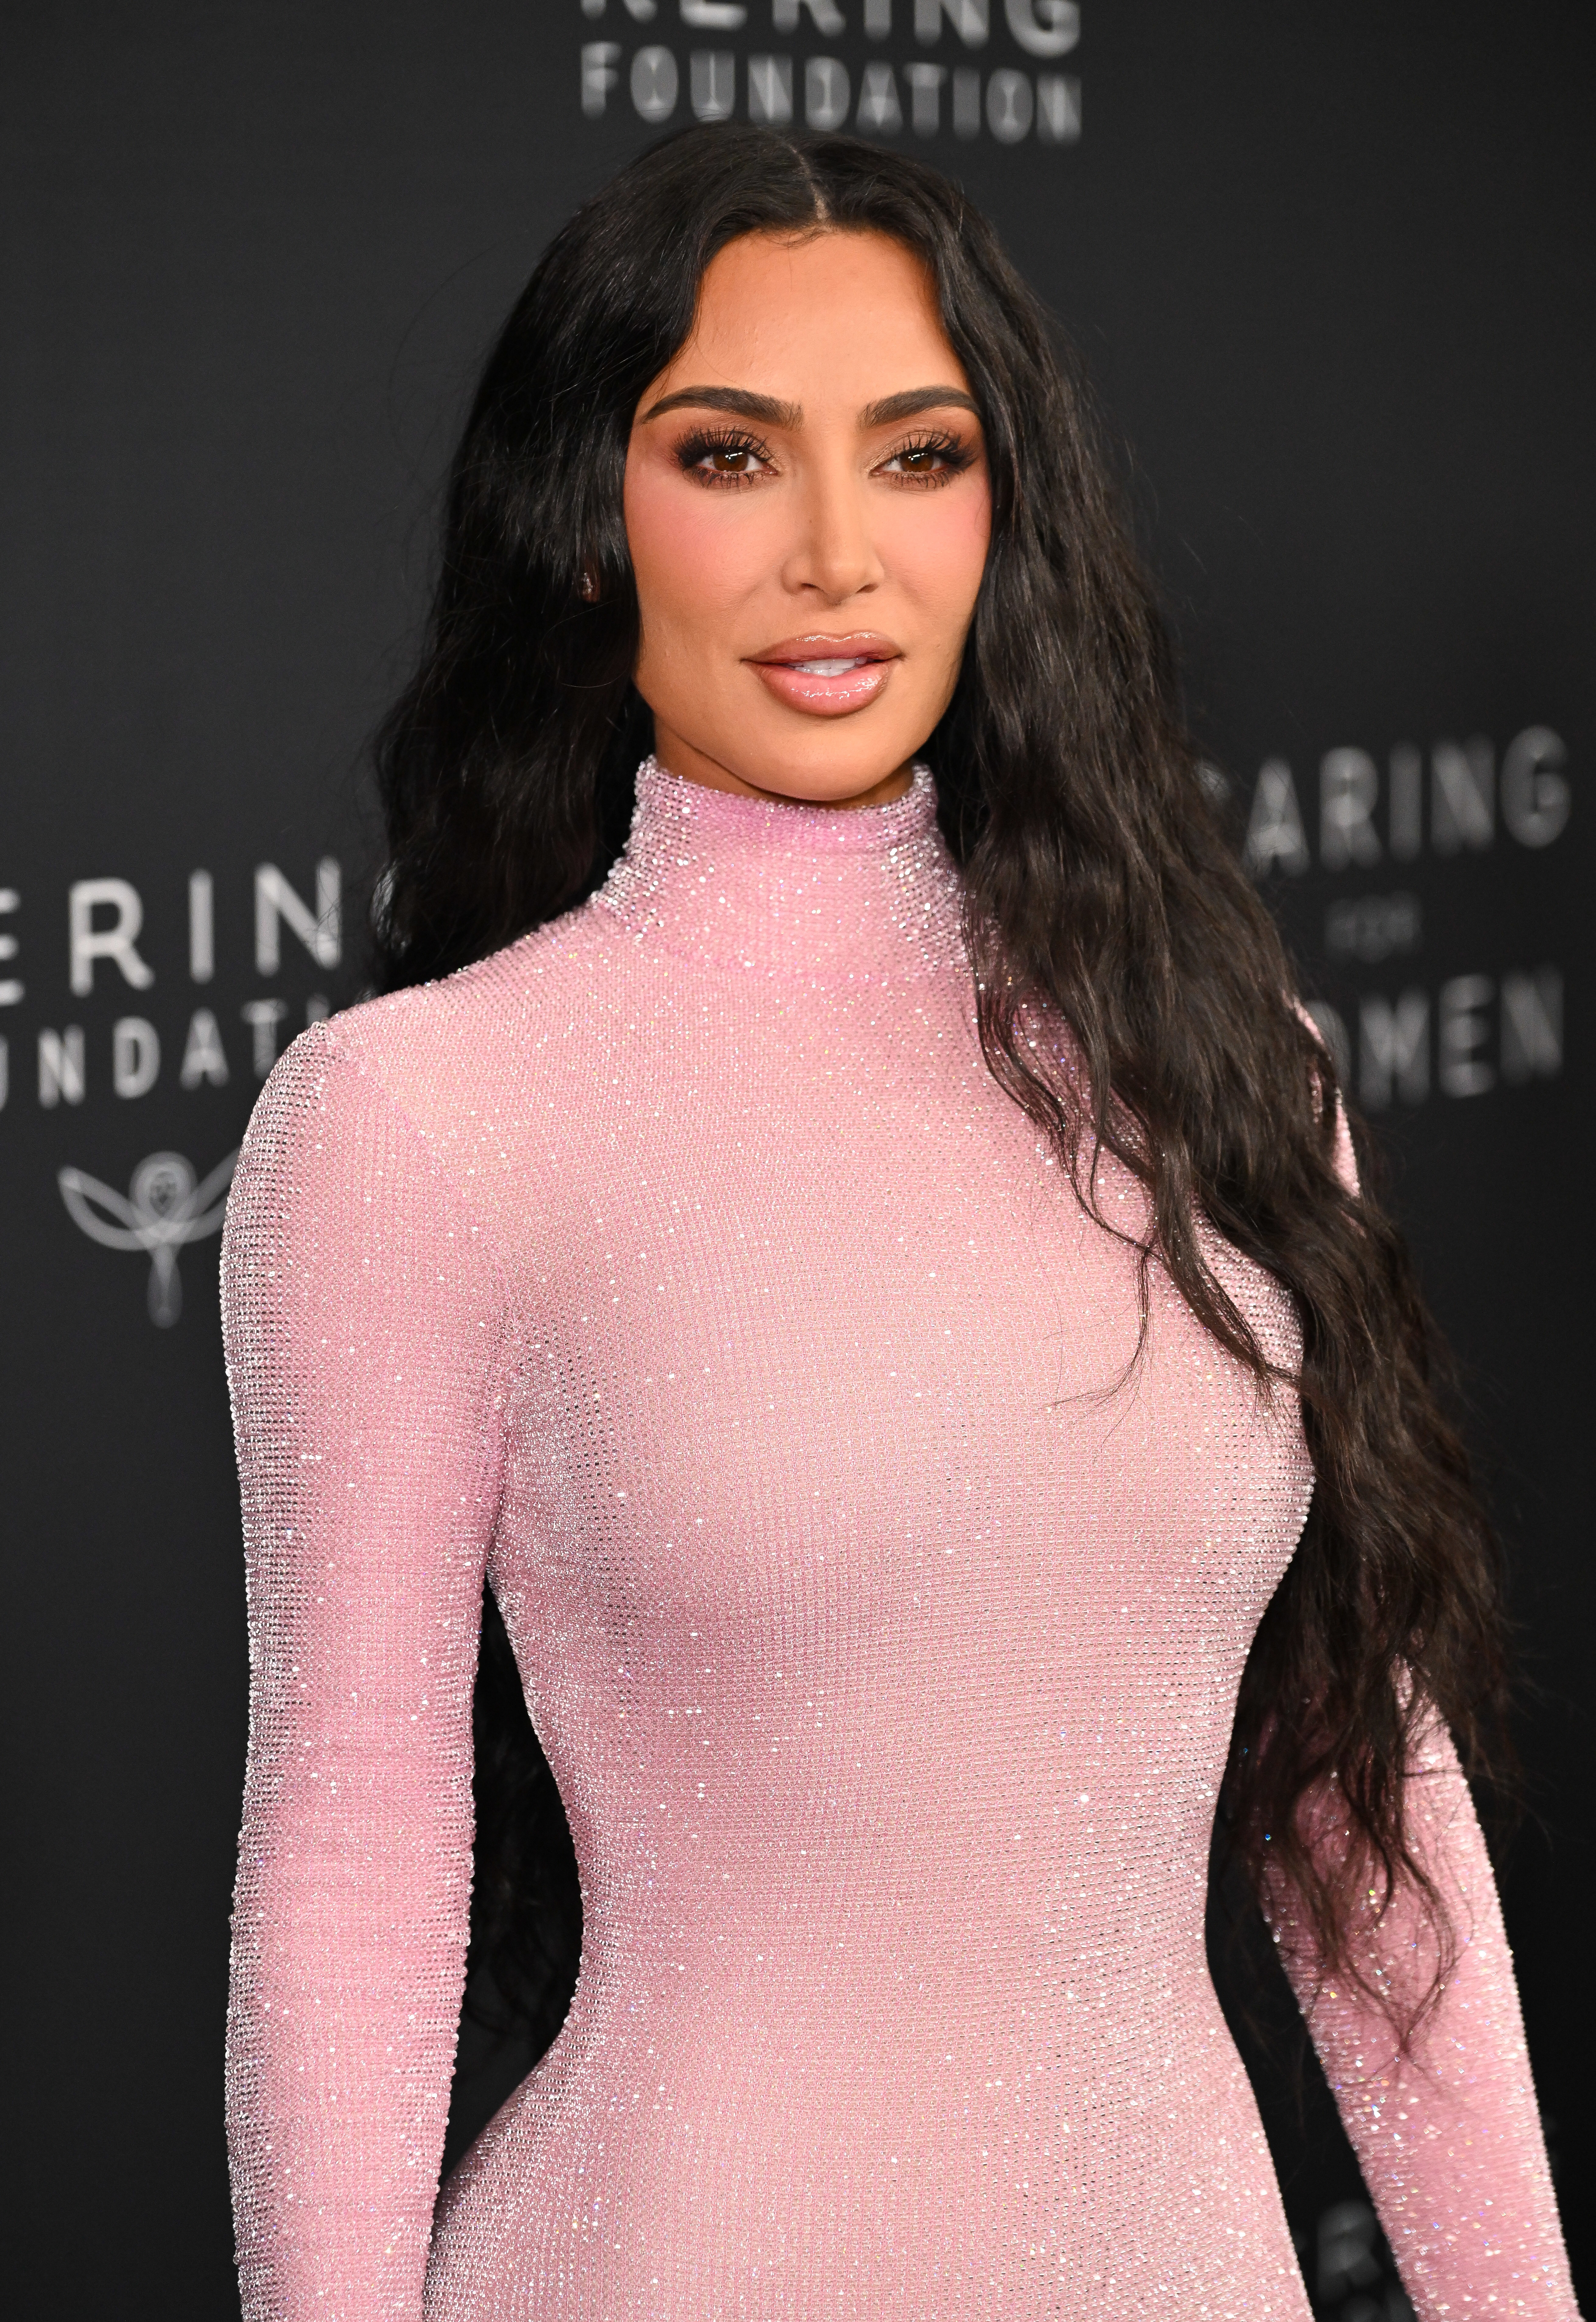 Close-up of Kim at a media event in a shiny, long-sleeved turtleneck outfit